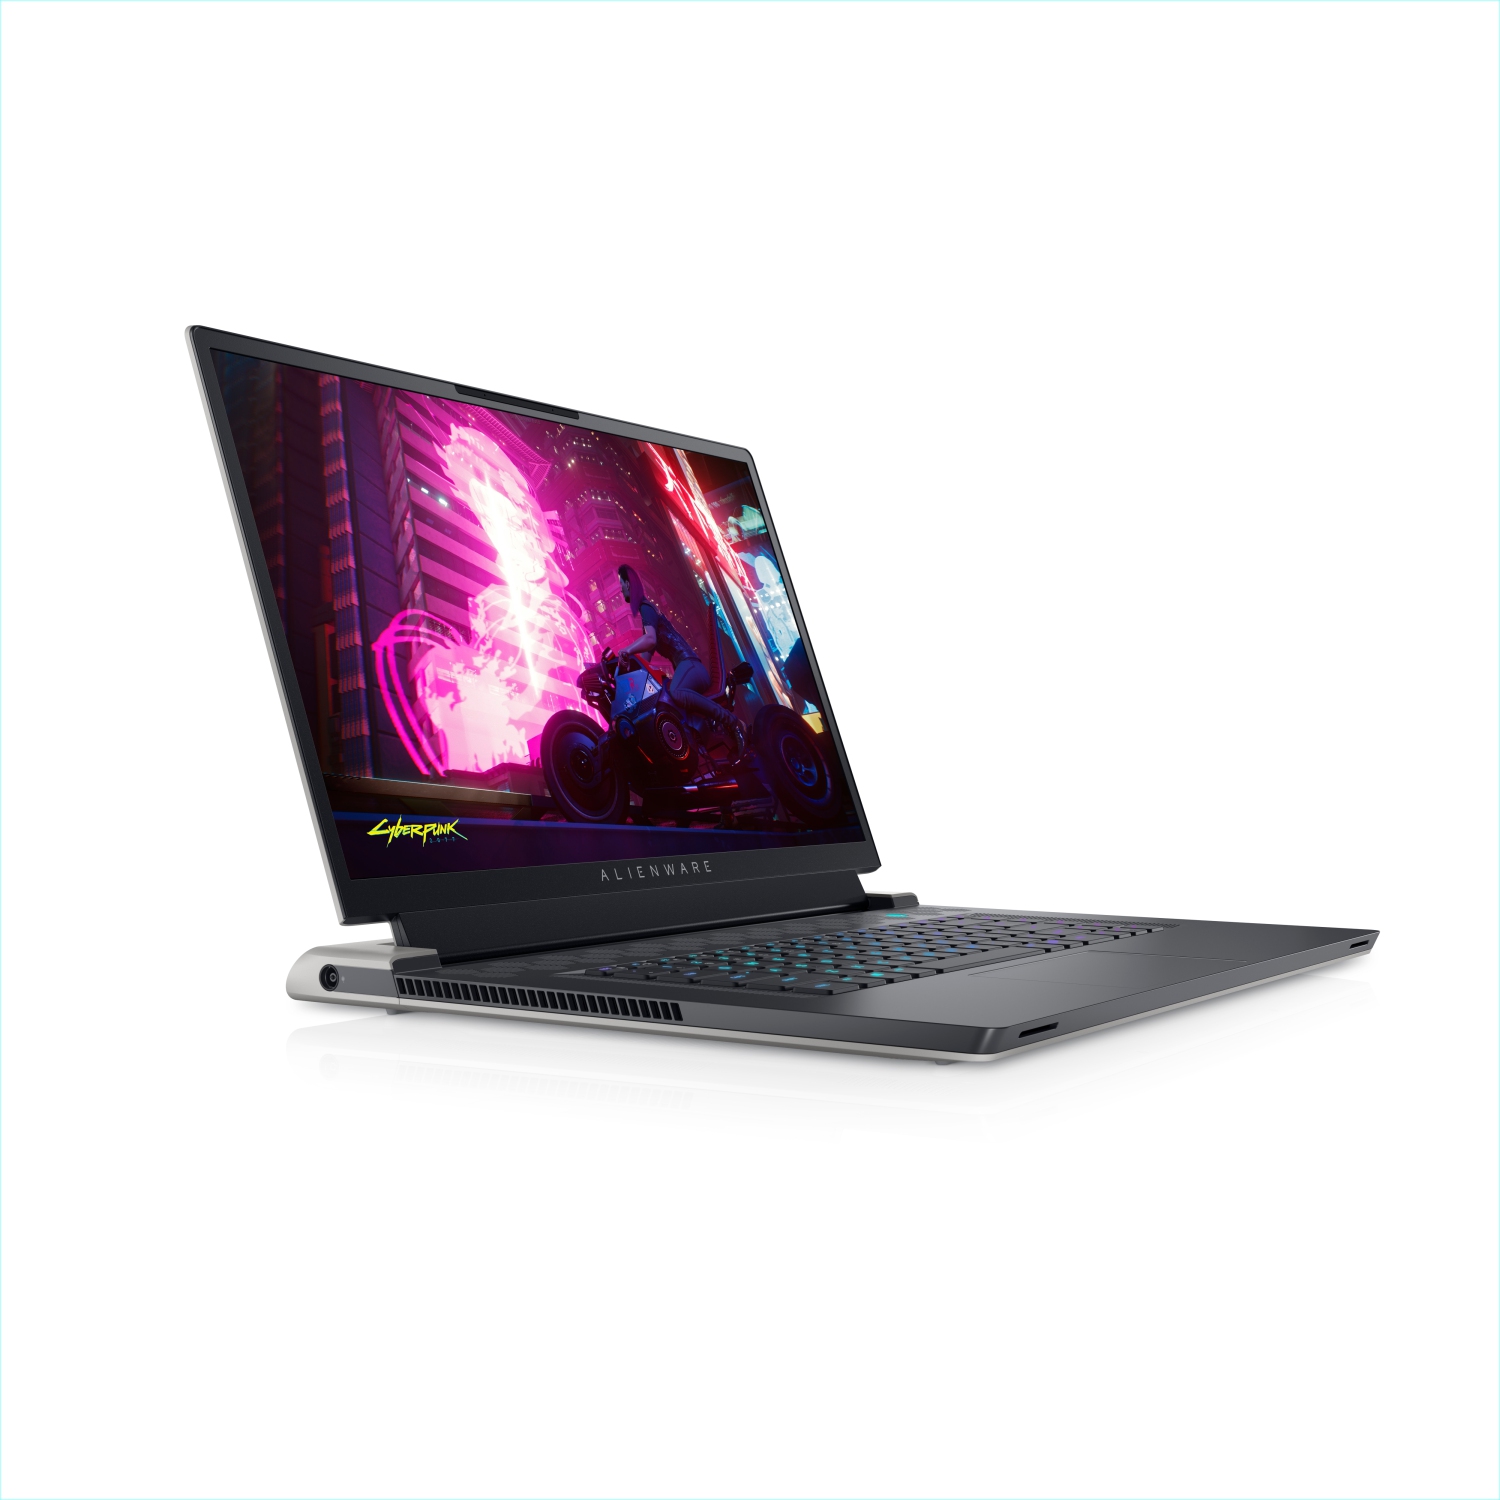 Refurbished (Excellent) - Dell Alienware X17 R1 Gaming Laptop (2021), 17.3" FHD, Core i7 - 256GB SSD + 256GB SSD - 16GB RAM - RTX 3060, 4.6 GHz - 11th Gen CPU Certified